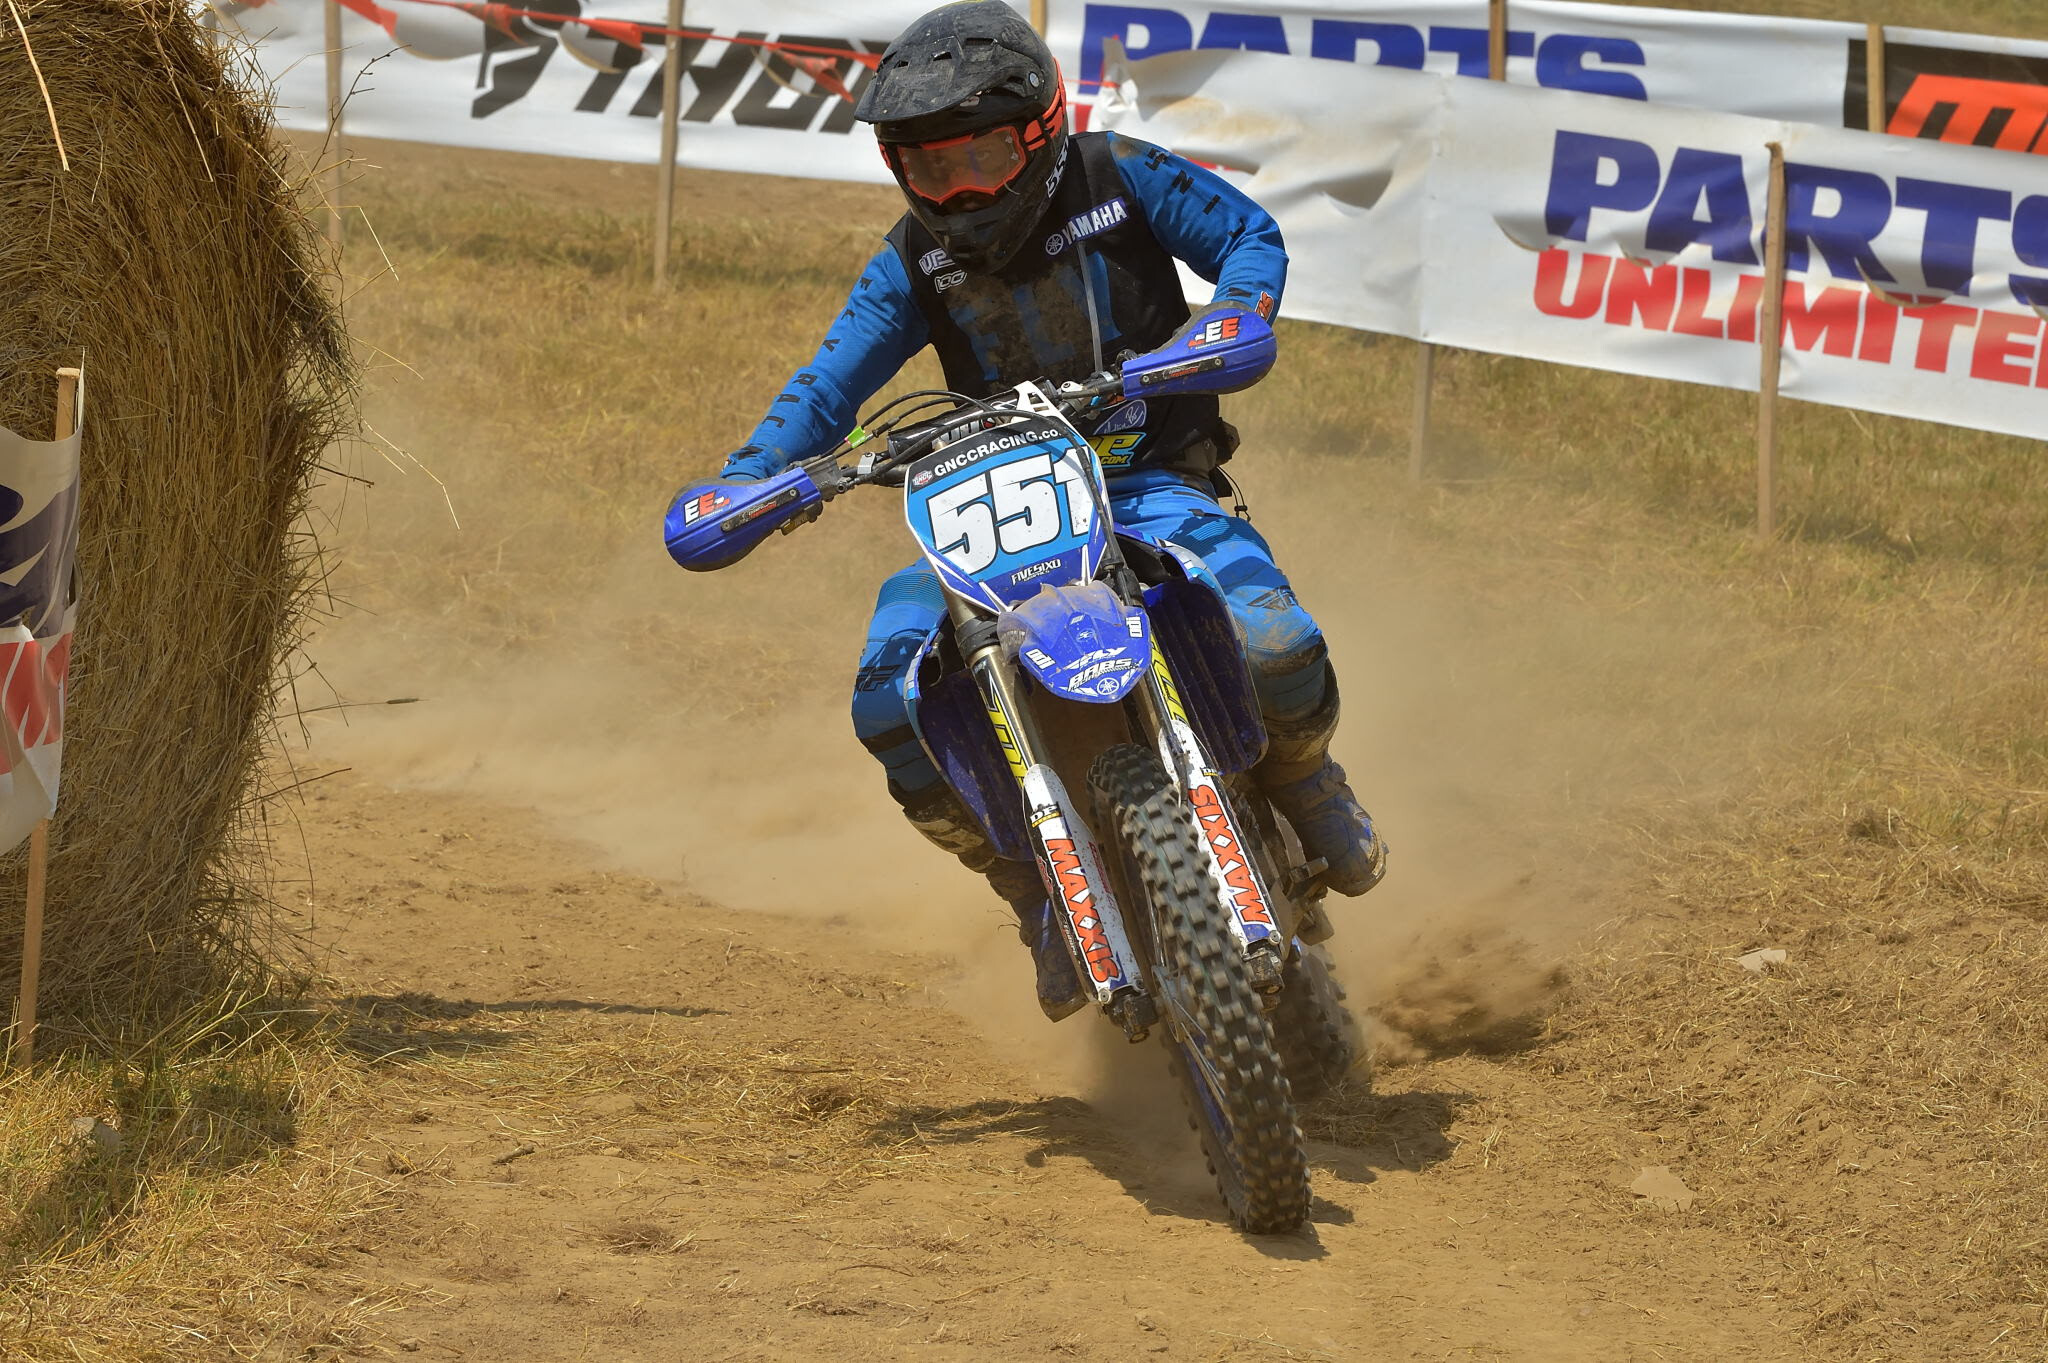 BABS Racing Yamaha's Becca Sheets will be looking to battle at the front of the WXC pack on Sunday.